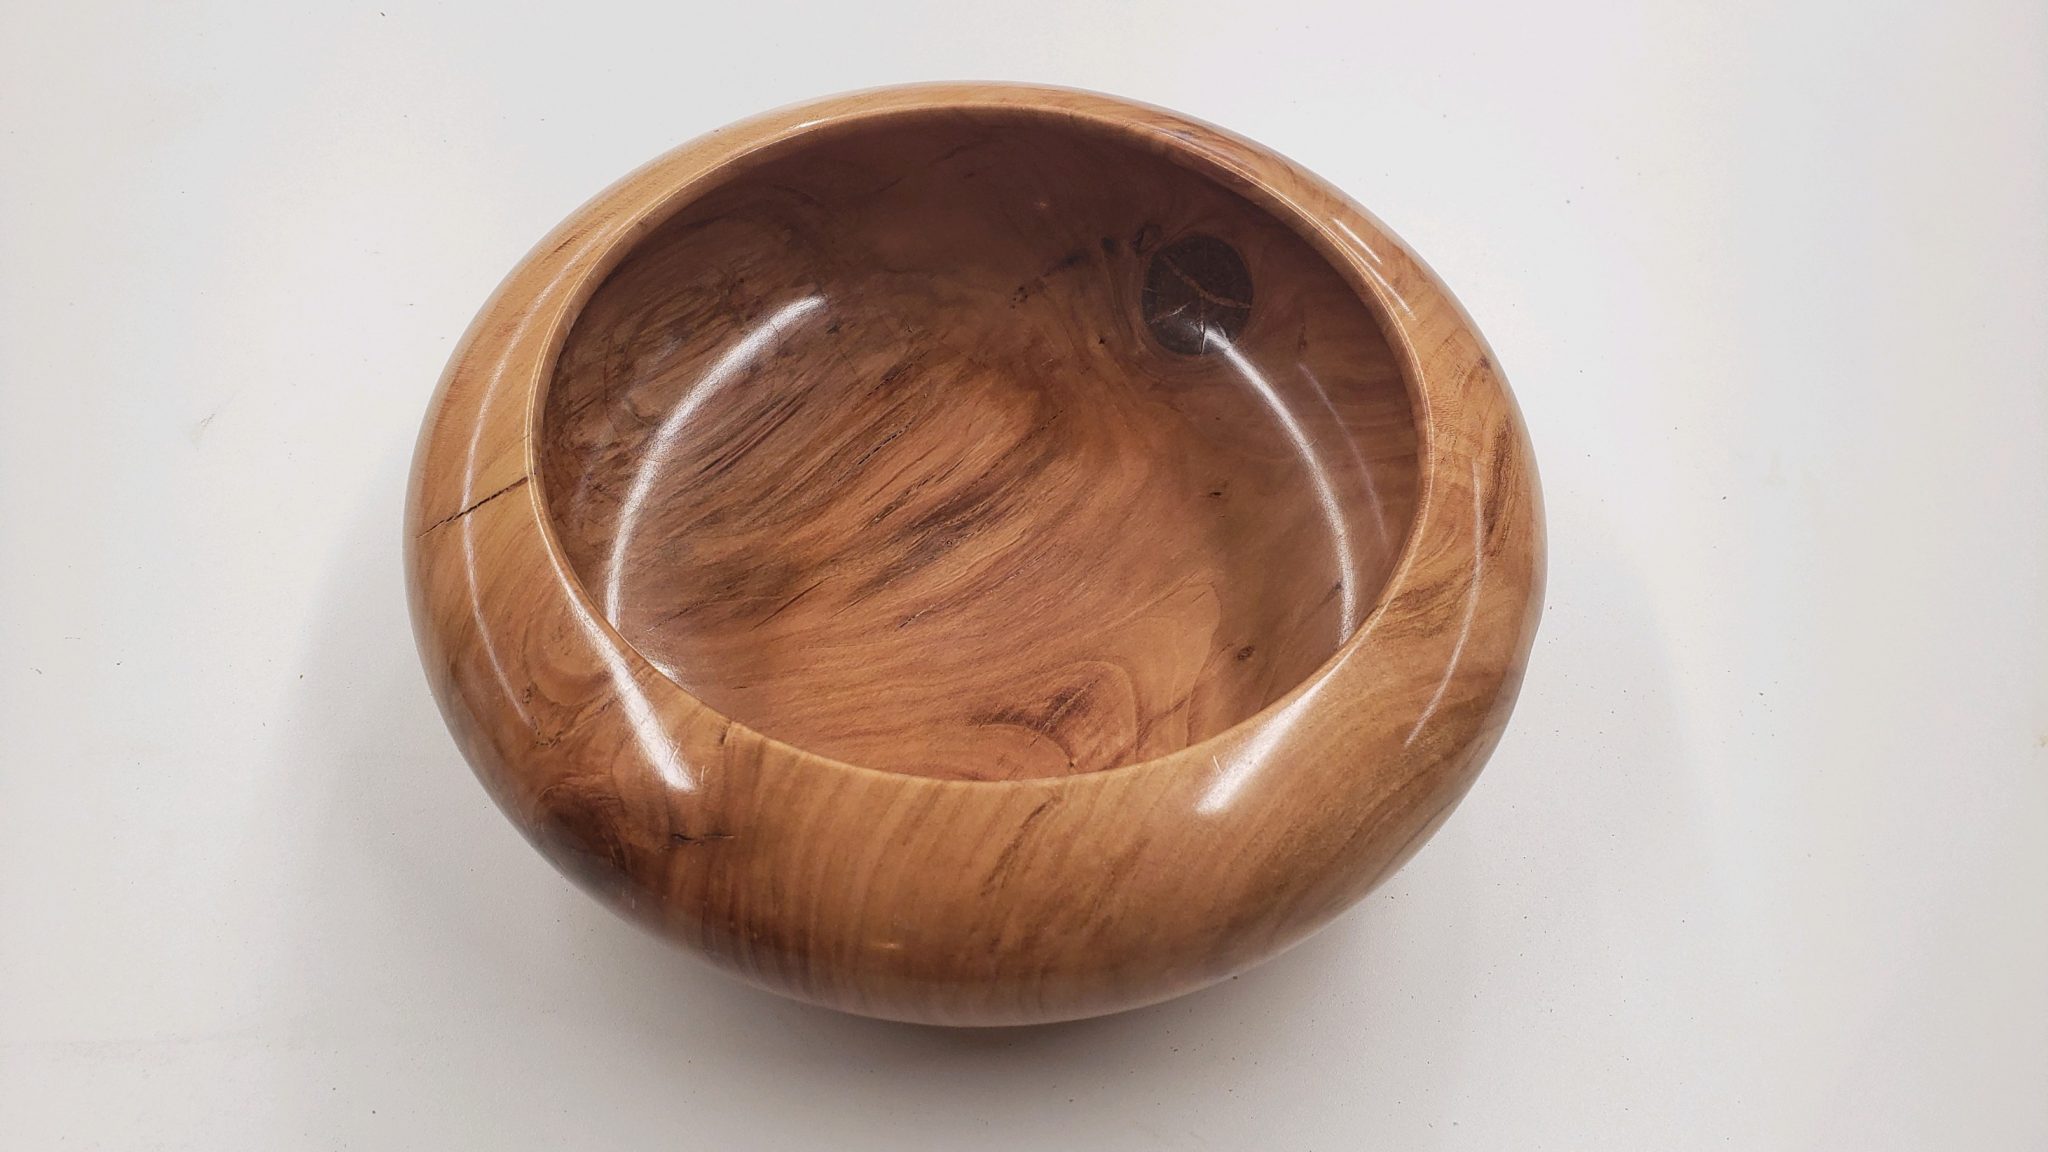 Multiple functional bowls in cherry, pear, and unknown.